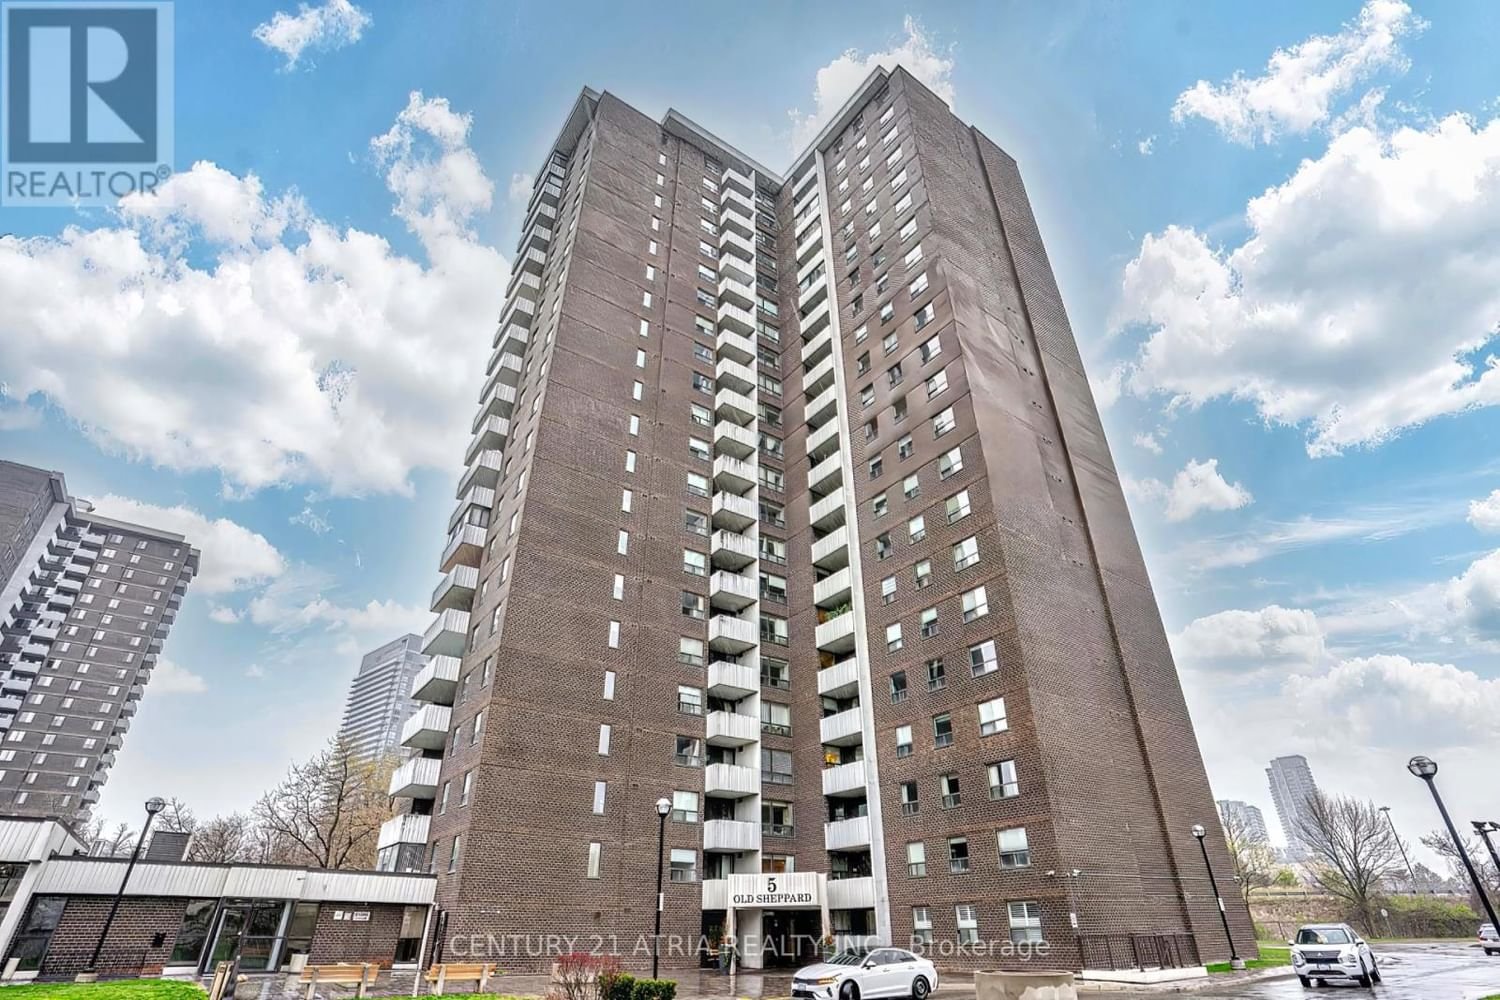 1009 - 5 OLD SHEPPARD AVENUE Image 1